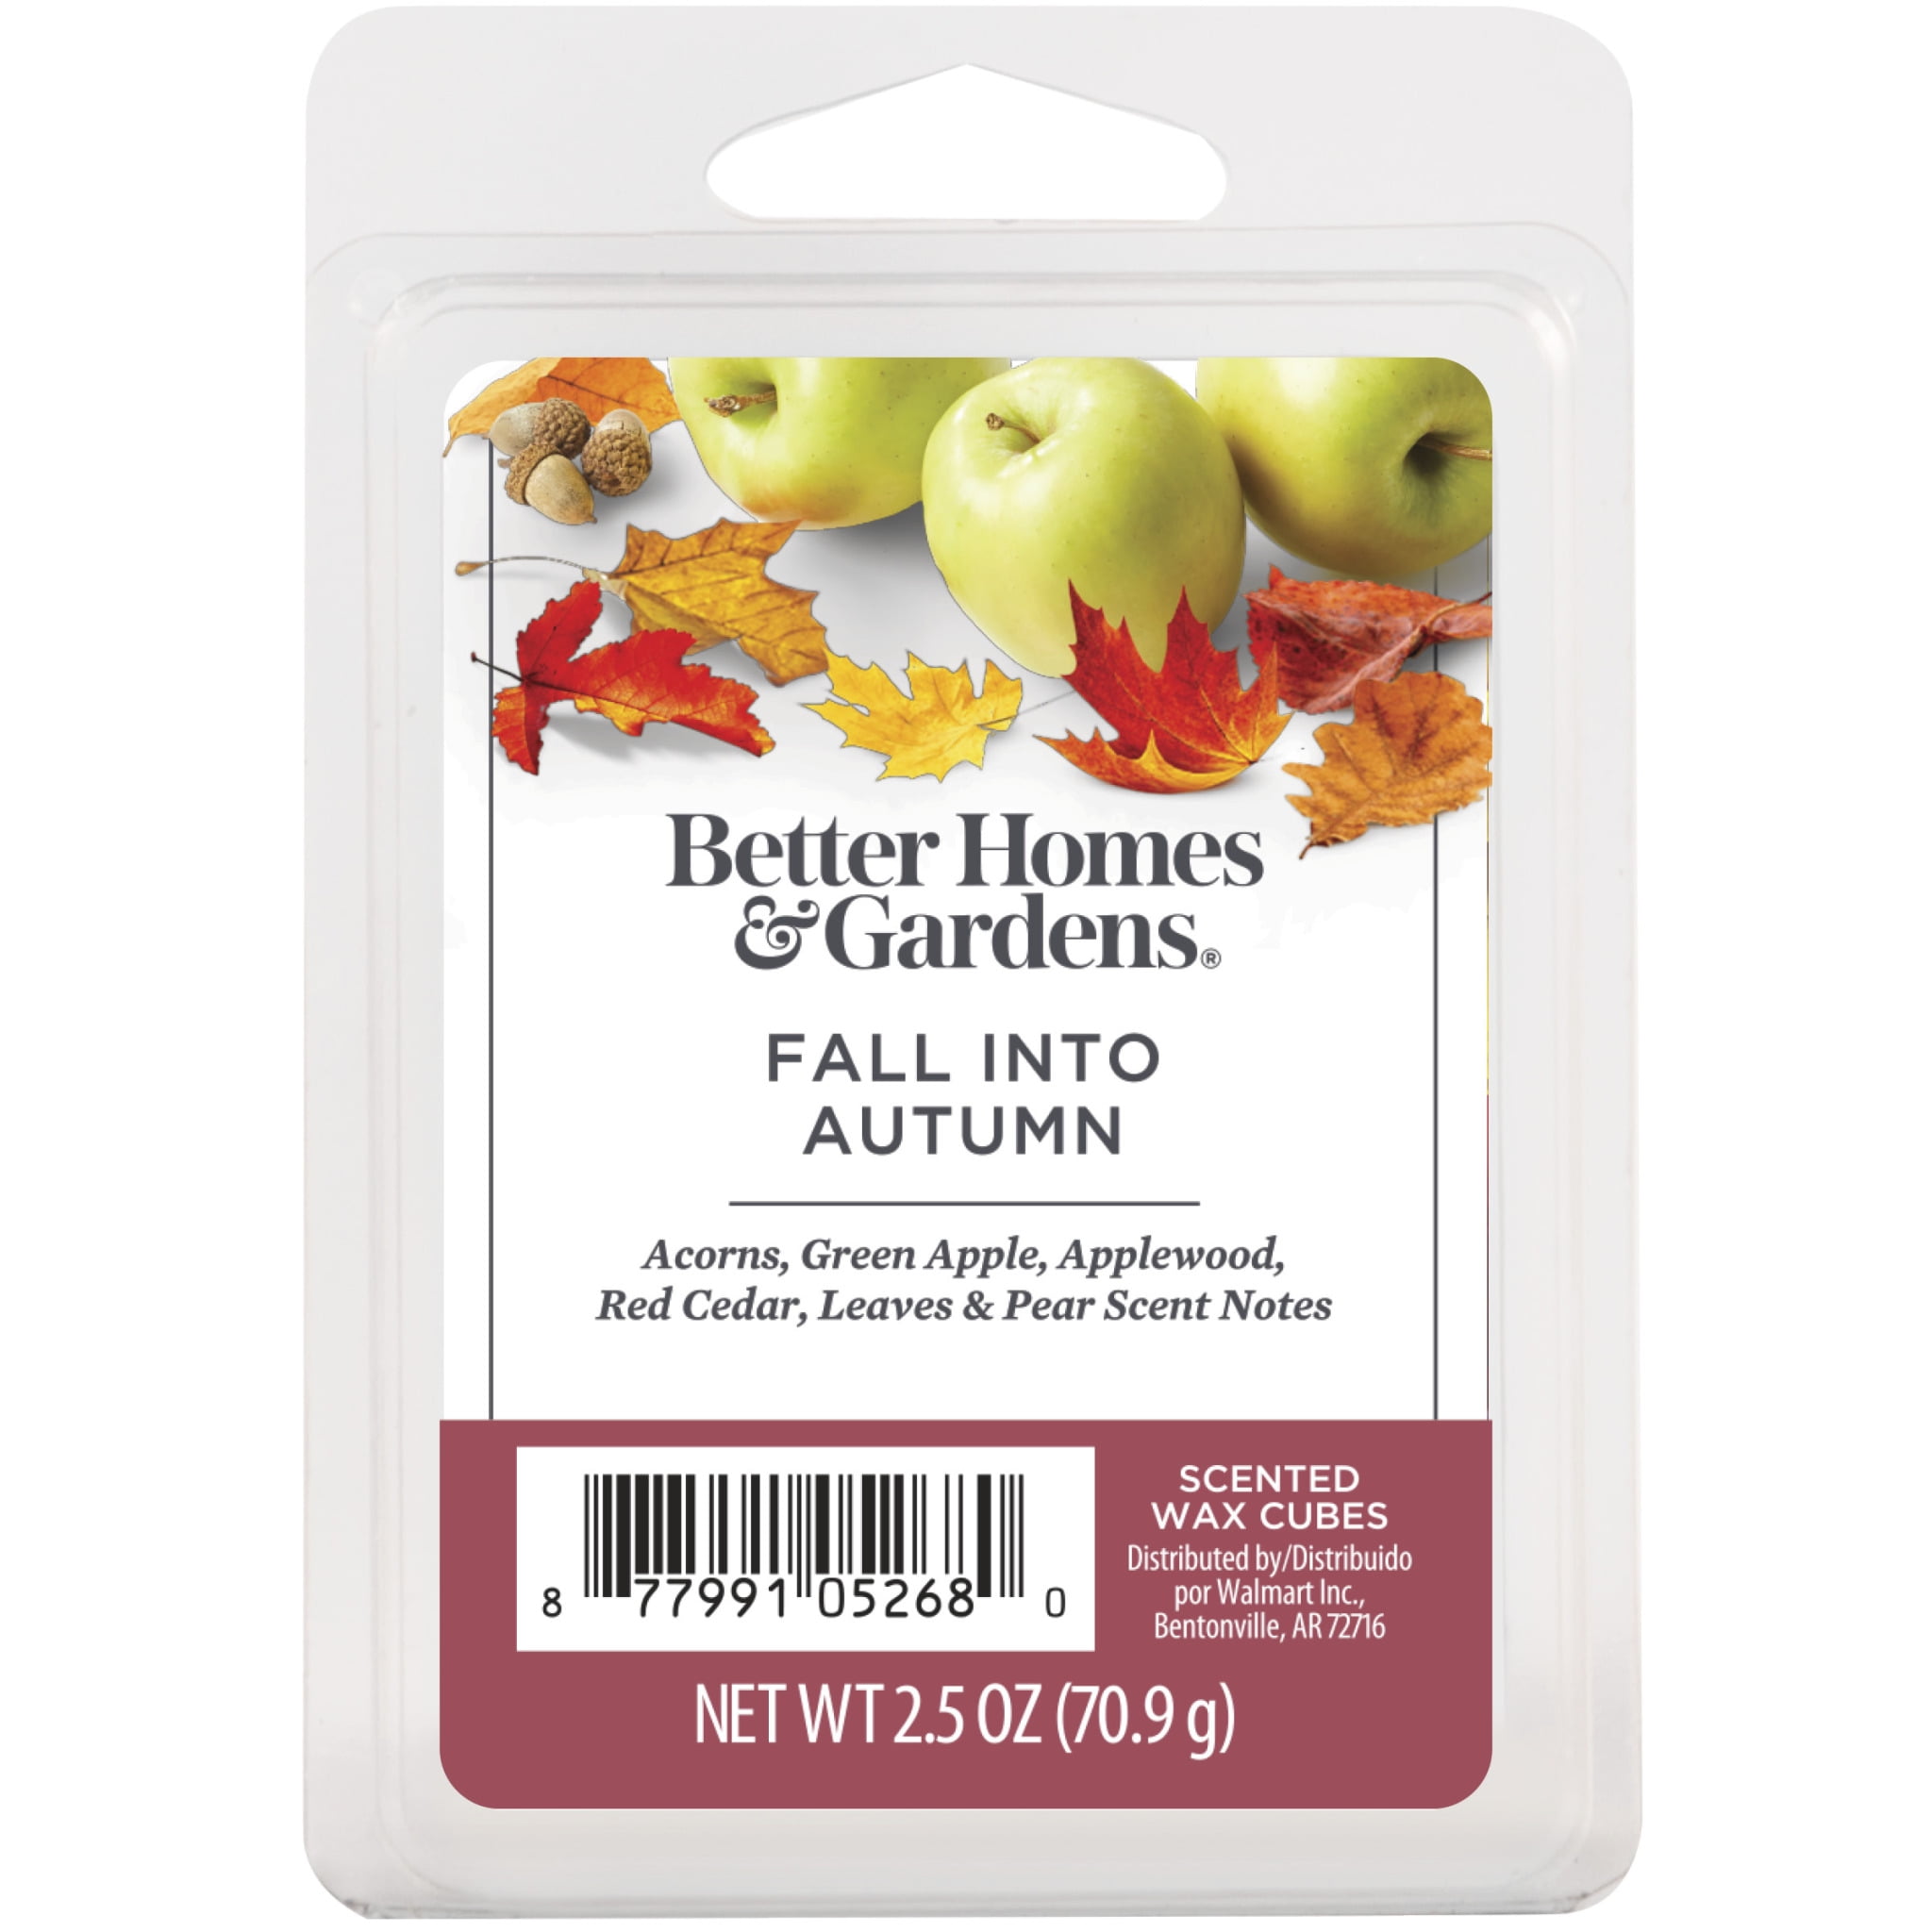 LEAVES - Autumn Spices & Mulled Fruit Luxury Wax Melts from AEMBR - Non- Toxic